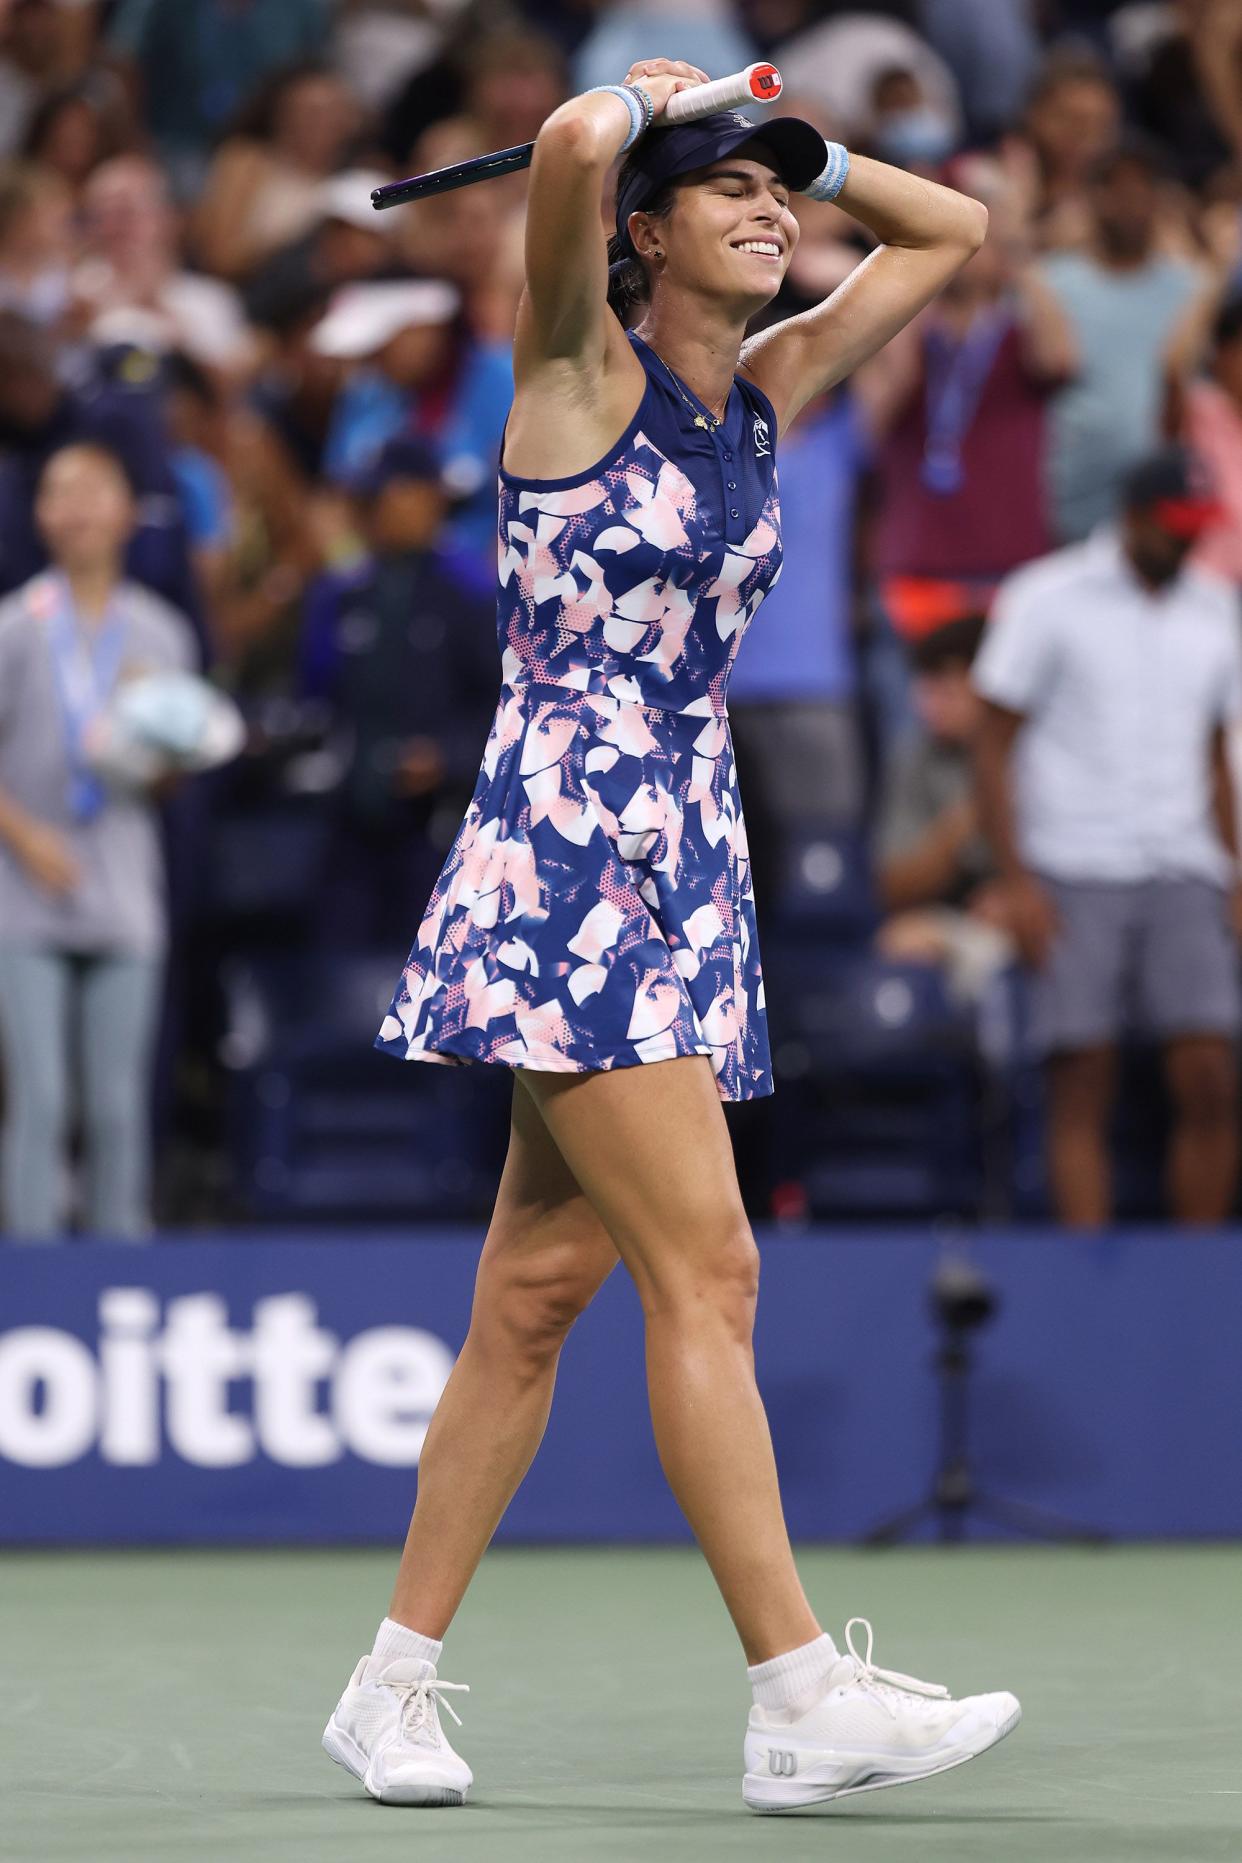 Ajla Tomljanović of Australia celebrates match point against Ludmilla Samsonova during their Women’s Singles Fourth Round match on Day Seven of the 2022 U.S. Open at USTA Billie Jean King National Tennis Center on Sept. 4, 2022, in Flushing, Queens.